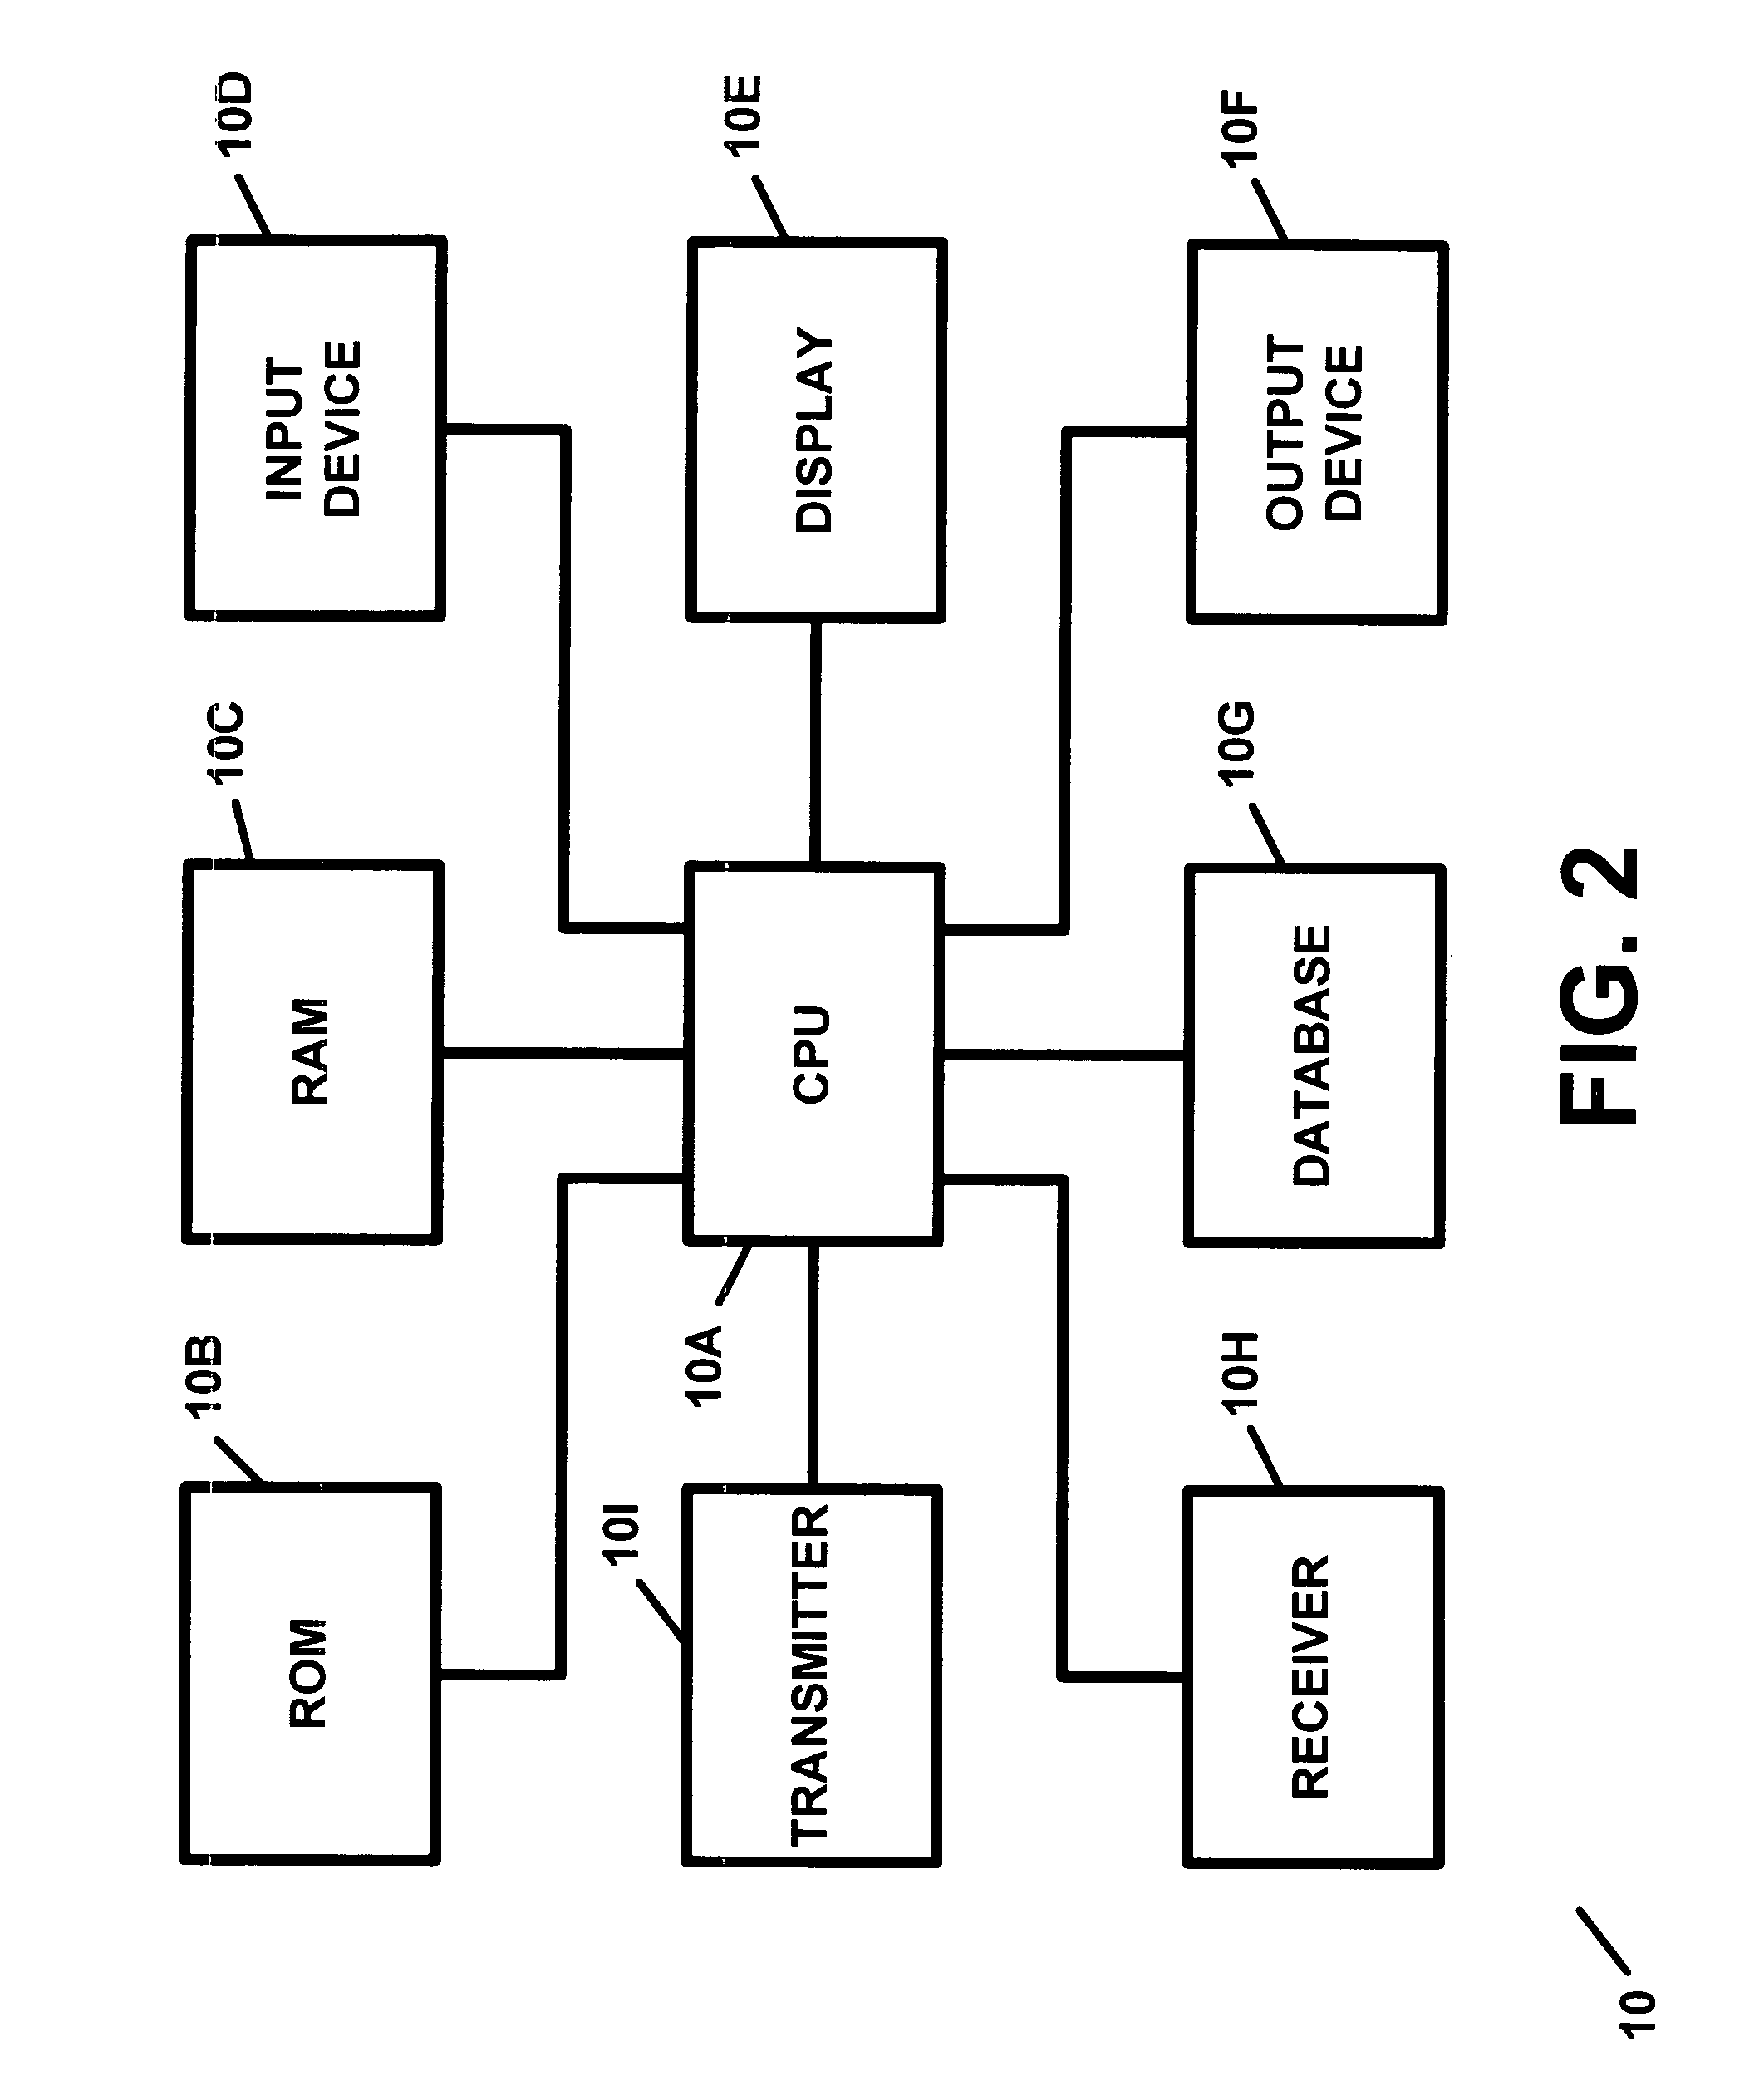 Apparatus and method for identifying and/or for analyzing potential patent infringement